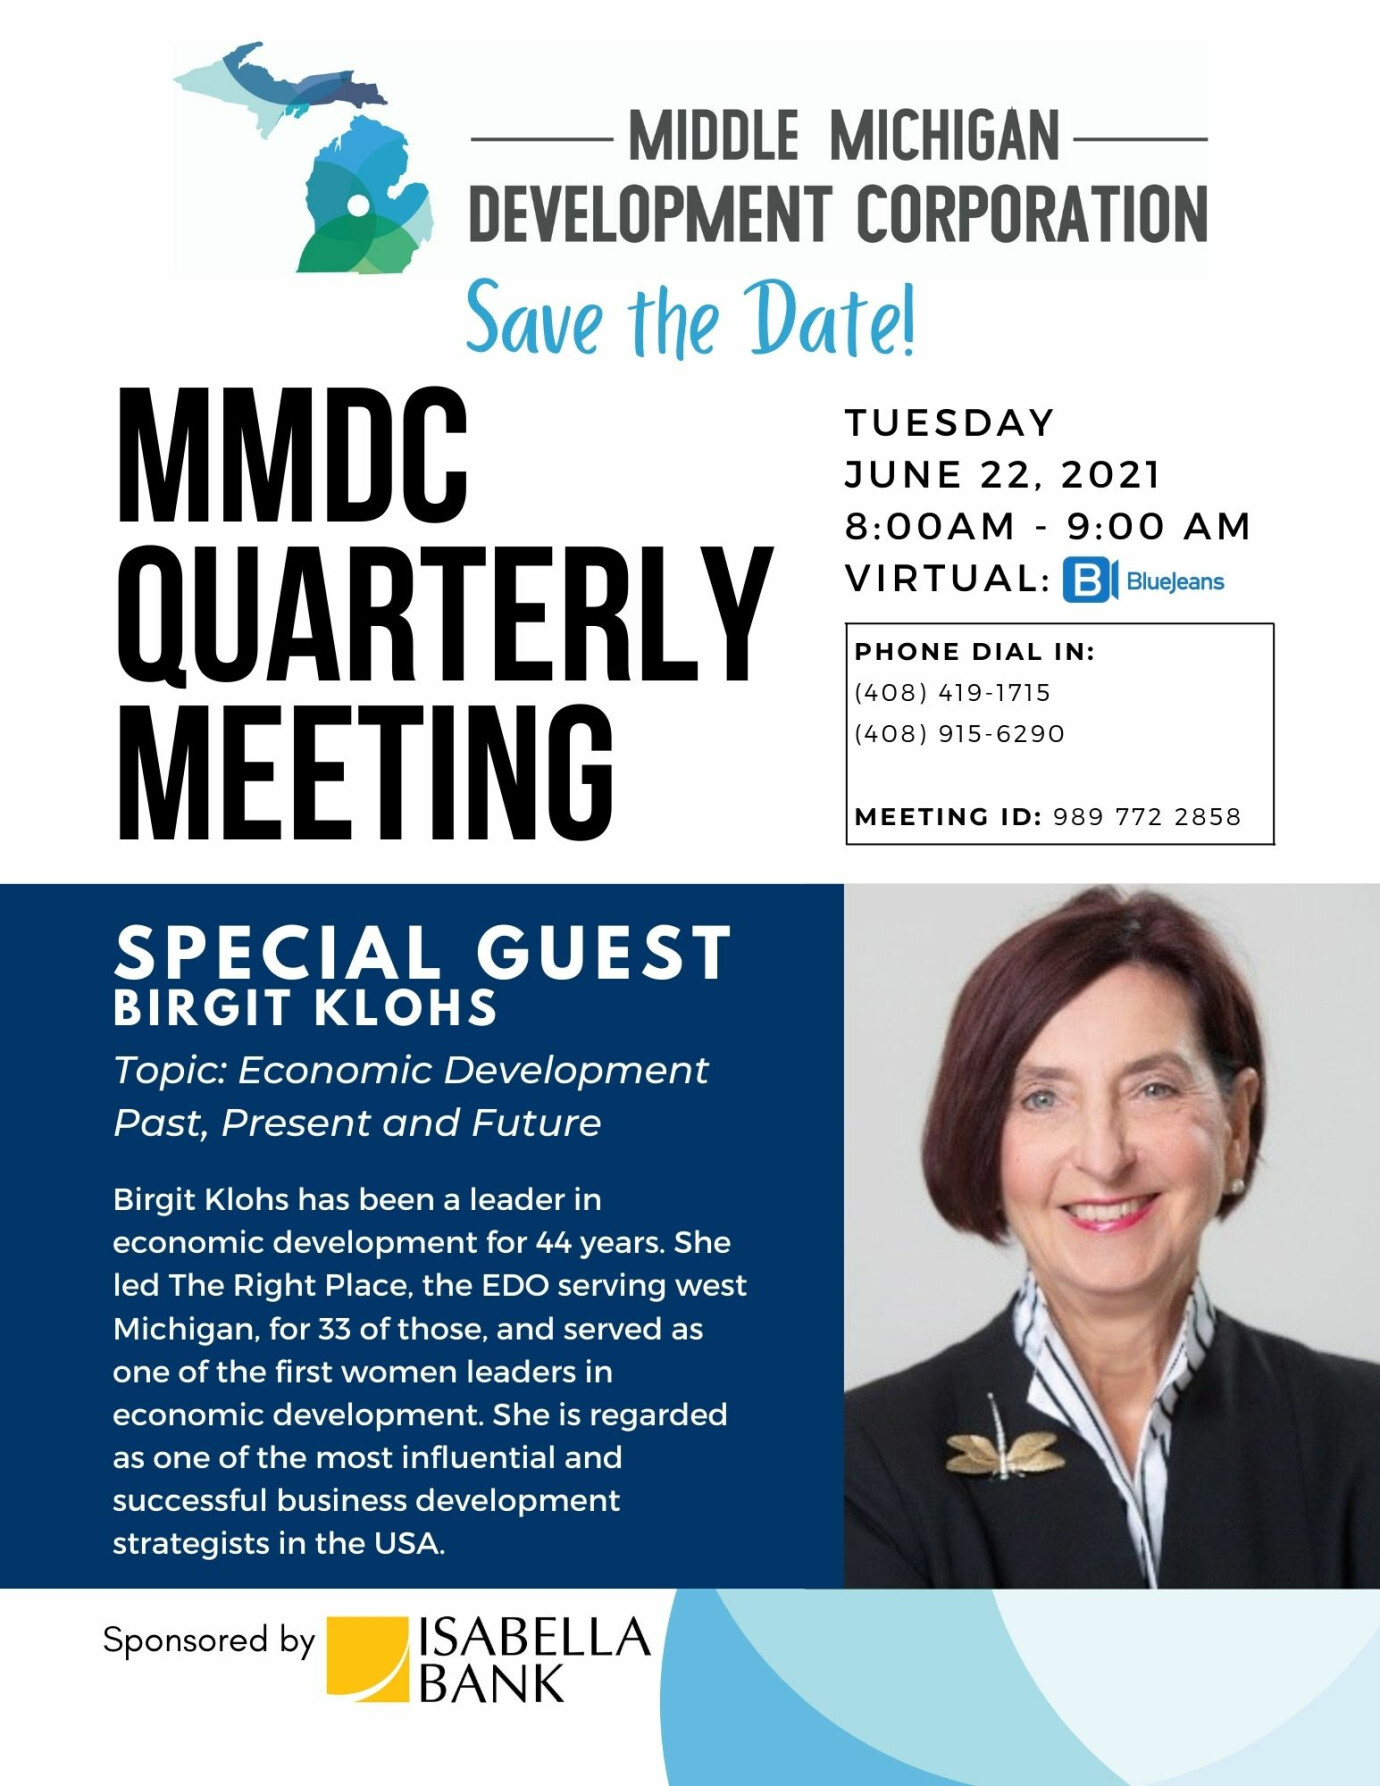 June Quarterly Meeting Featuring Birgit Klohs, Past President and CEO of The Right Place